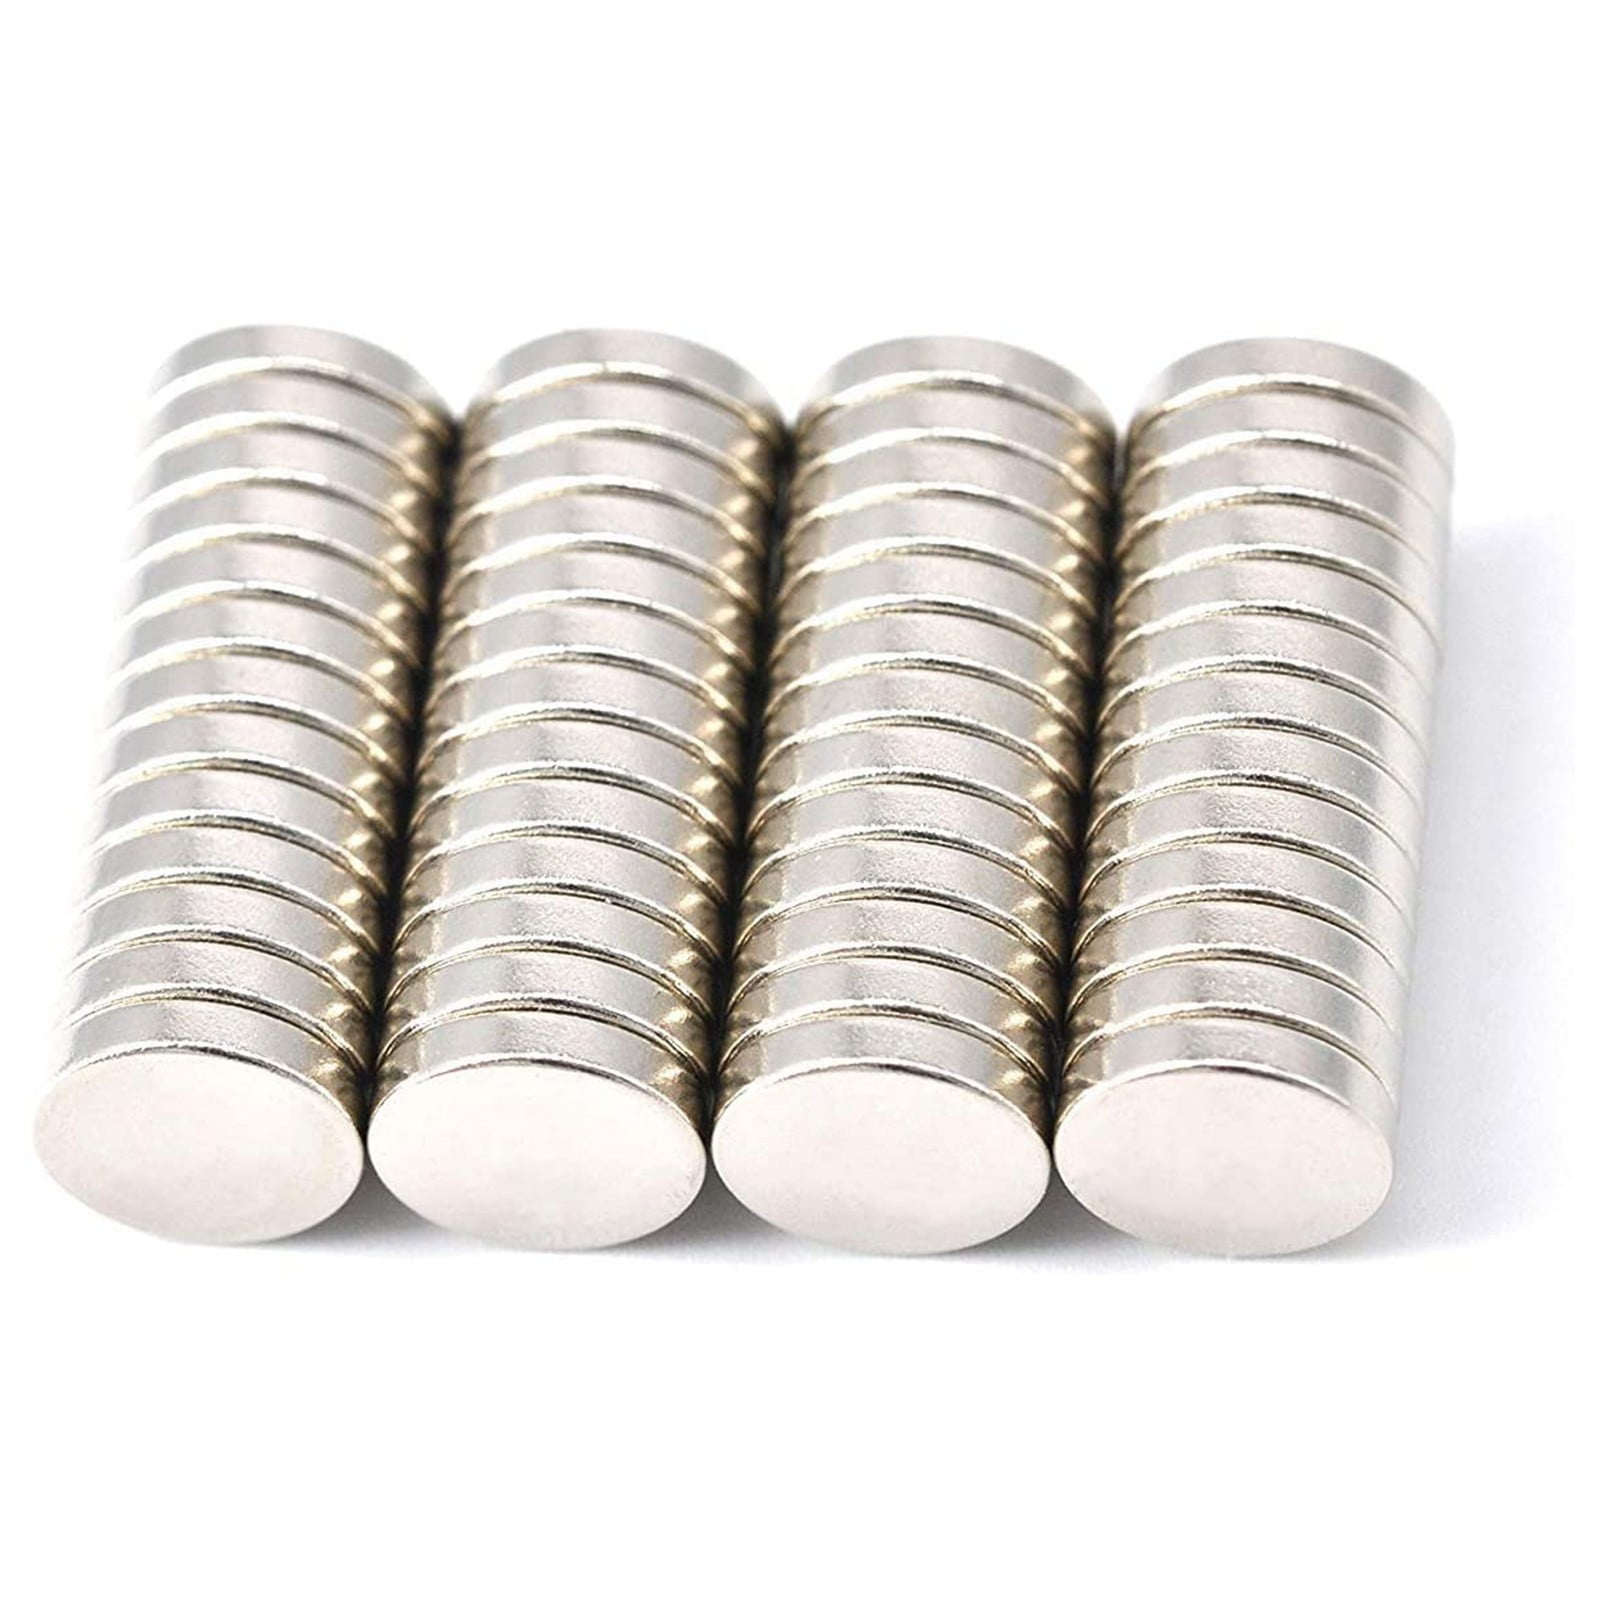 50pcs 8 x 3 mm Hole 3mm Rare Earth  Round Neodymium Countersunk Ring Magnets N50 